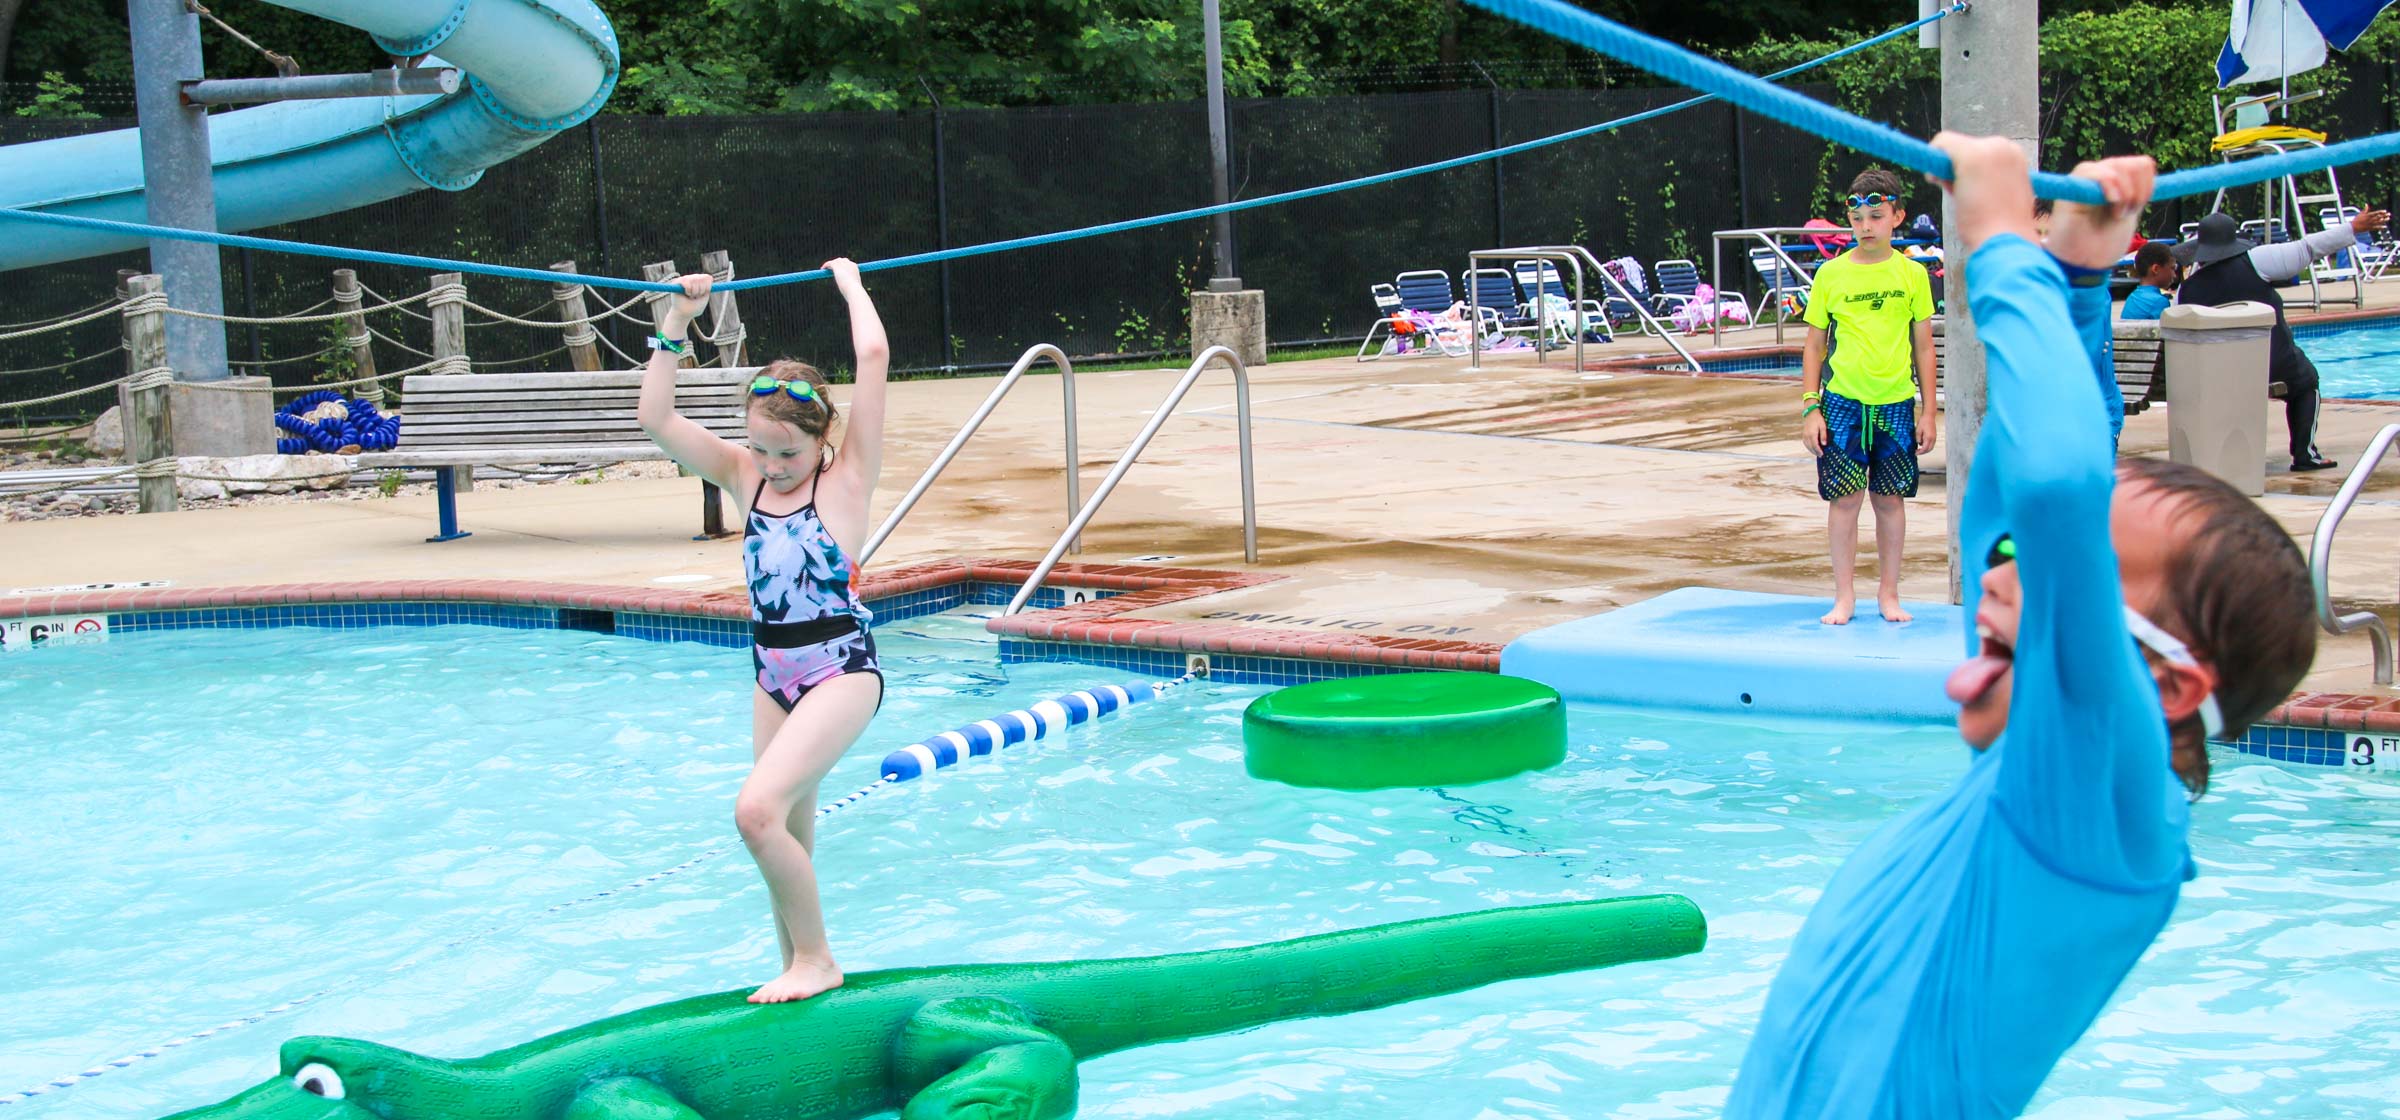 Campers playing at a waterpark